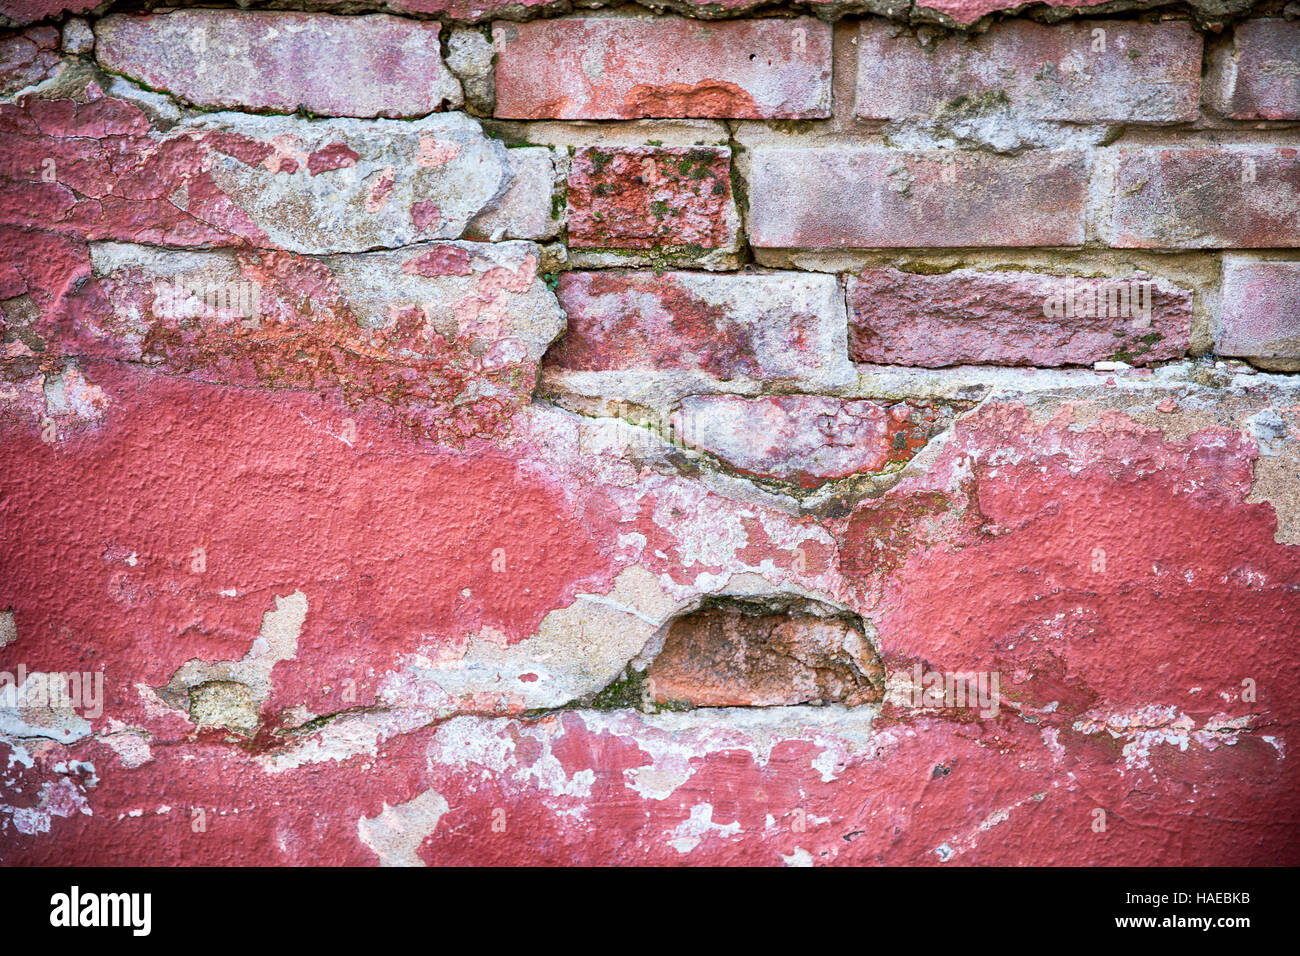 Decaying wall grunge texture. Red paint and exposed brick with plaster falling off Stock Photo